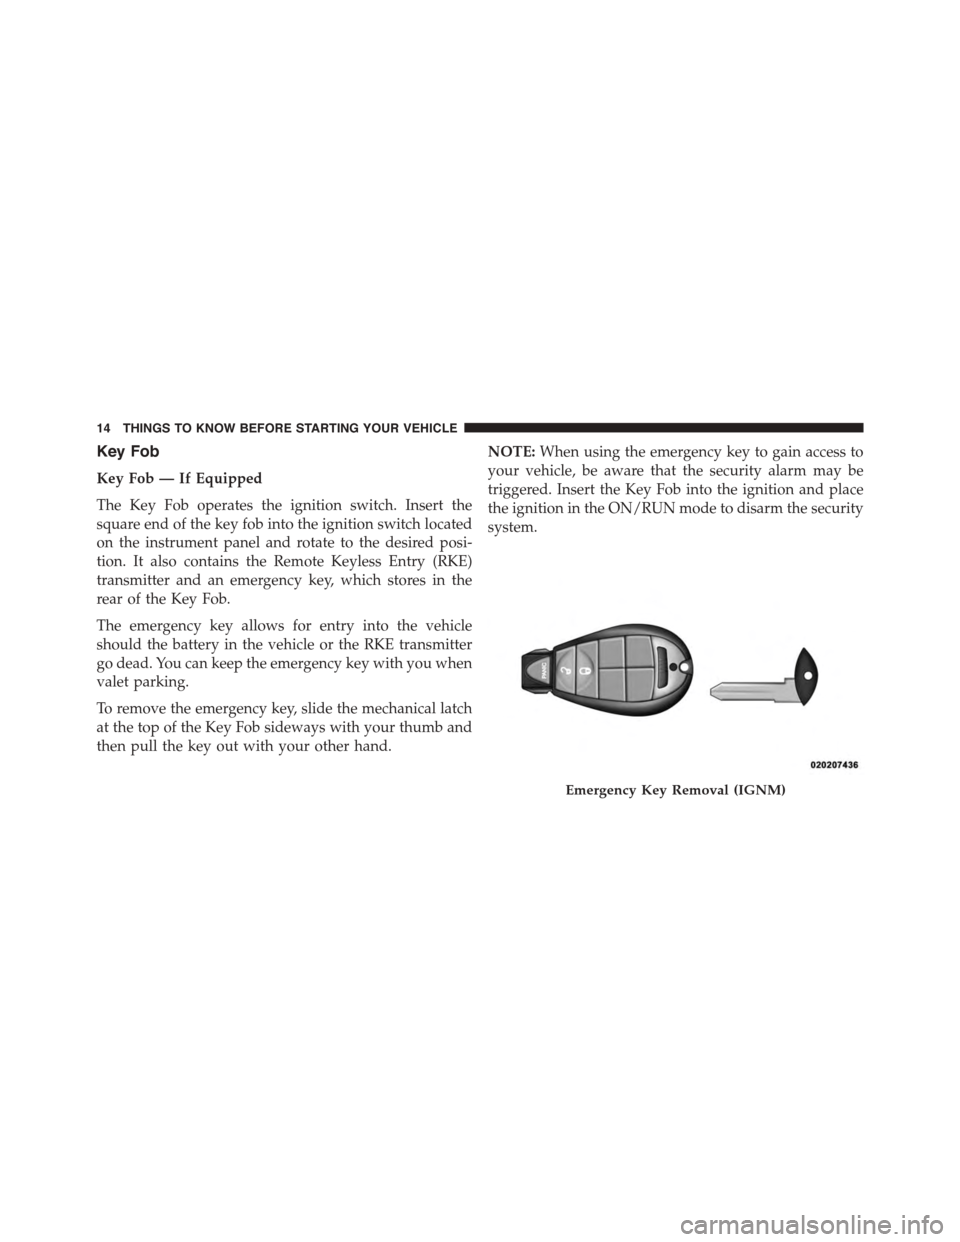 Ram 1500 2015  Owners Manual Key Fob
Key Fob — If Equipped
The Key Fob operates the ignition switch. Insert the
square end of the key fob into the ignition switch located
on the instrument panel and rotate to the desired posi-
